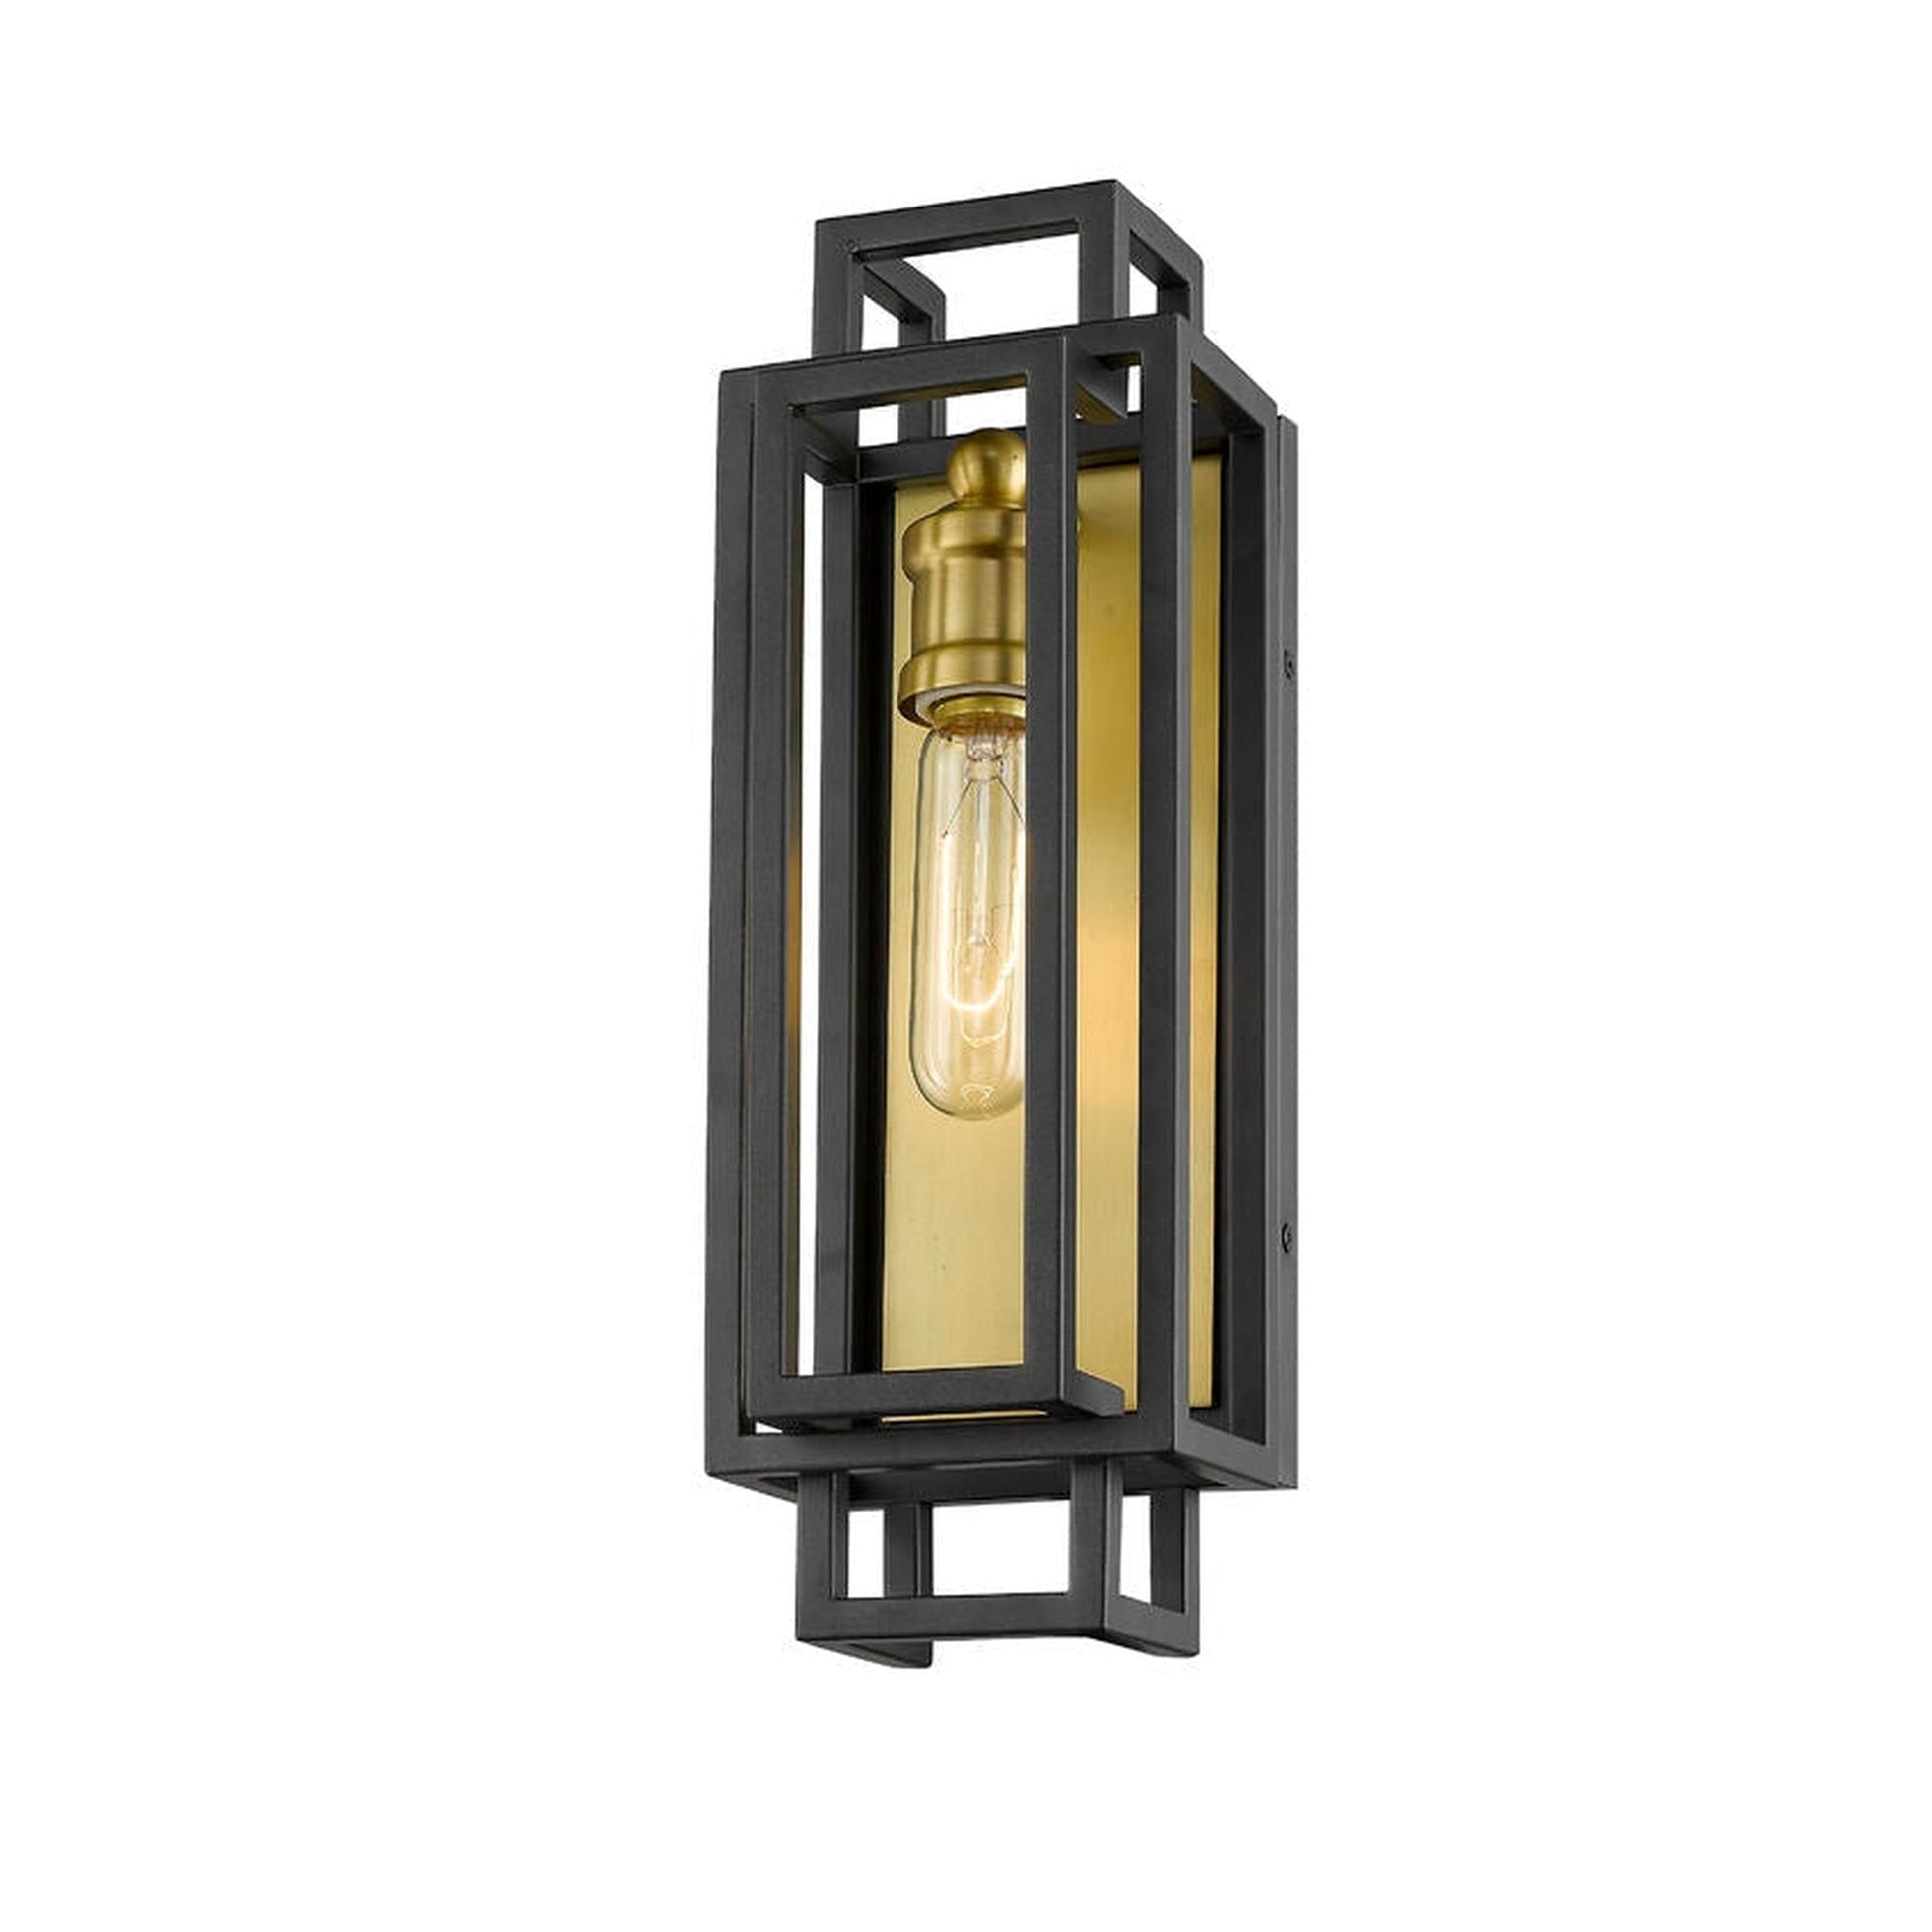 Z-Lite Titania 5" 1-Light Bronze and Olde Brass Wall Sconce